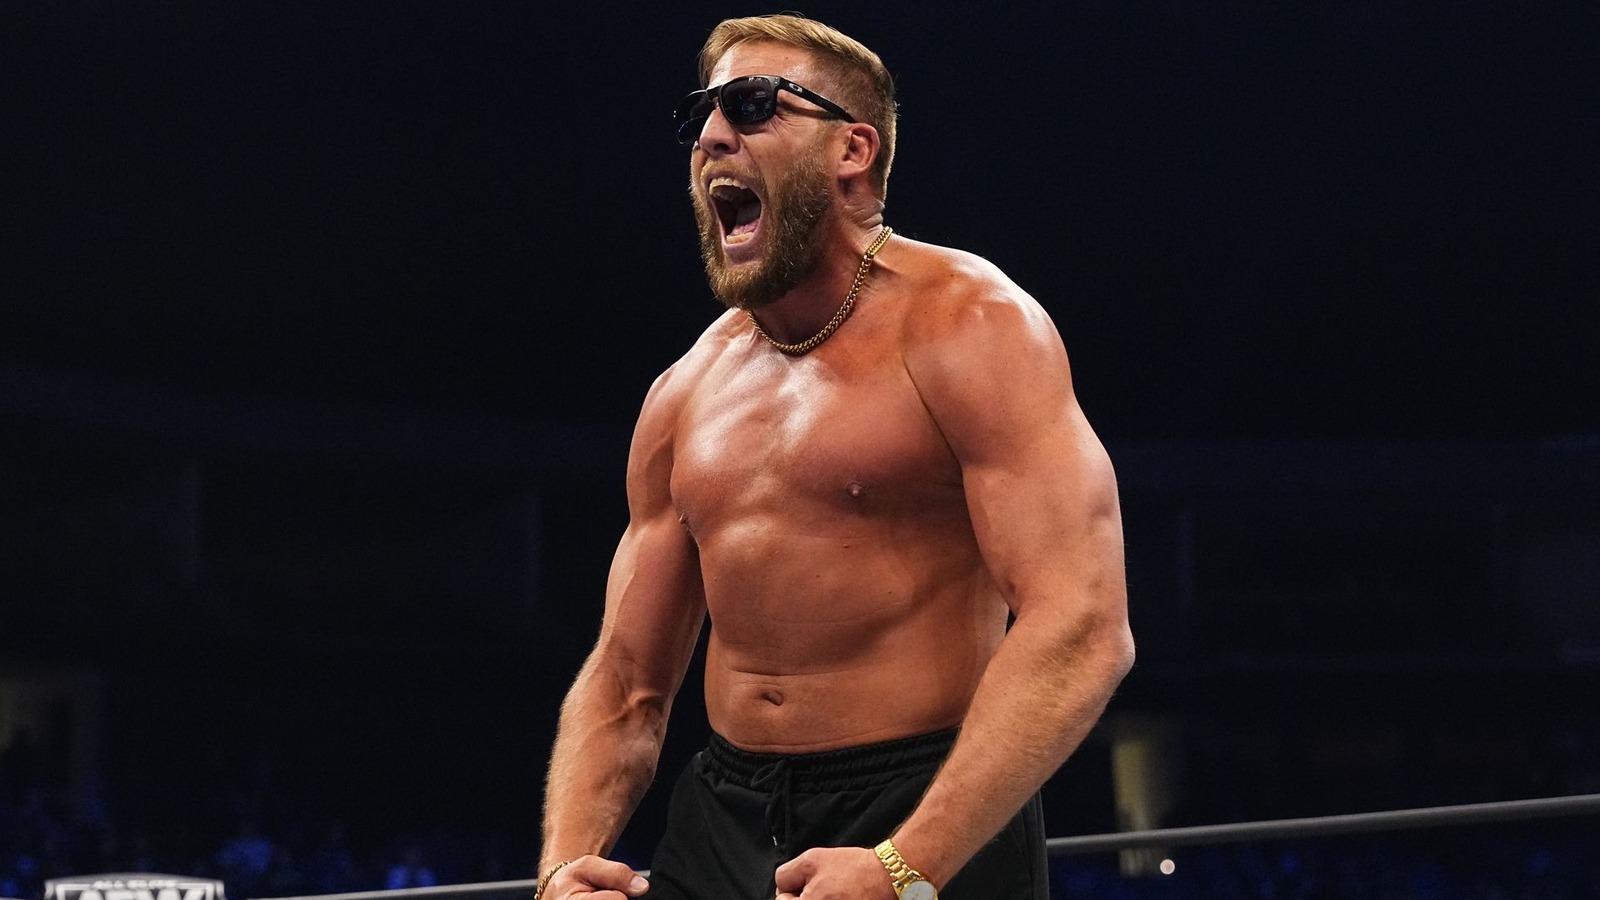 AEW's Jake Hager, Formerly Jack Swagger In WWE, Recalls Big Moments Of Career